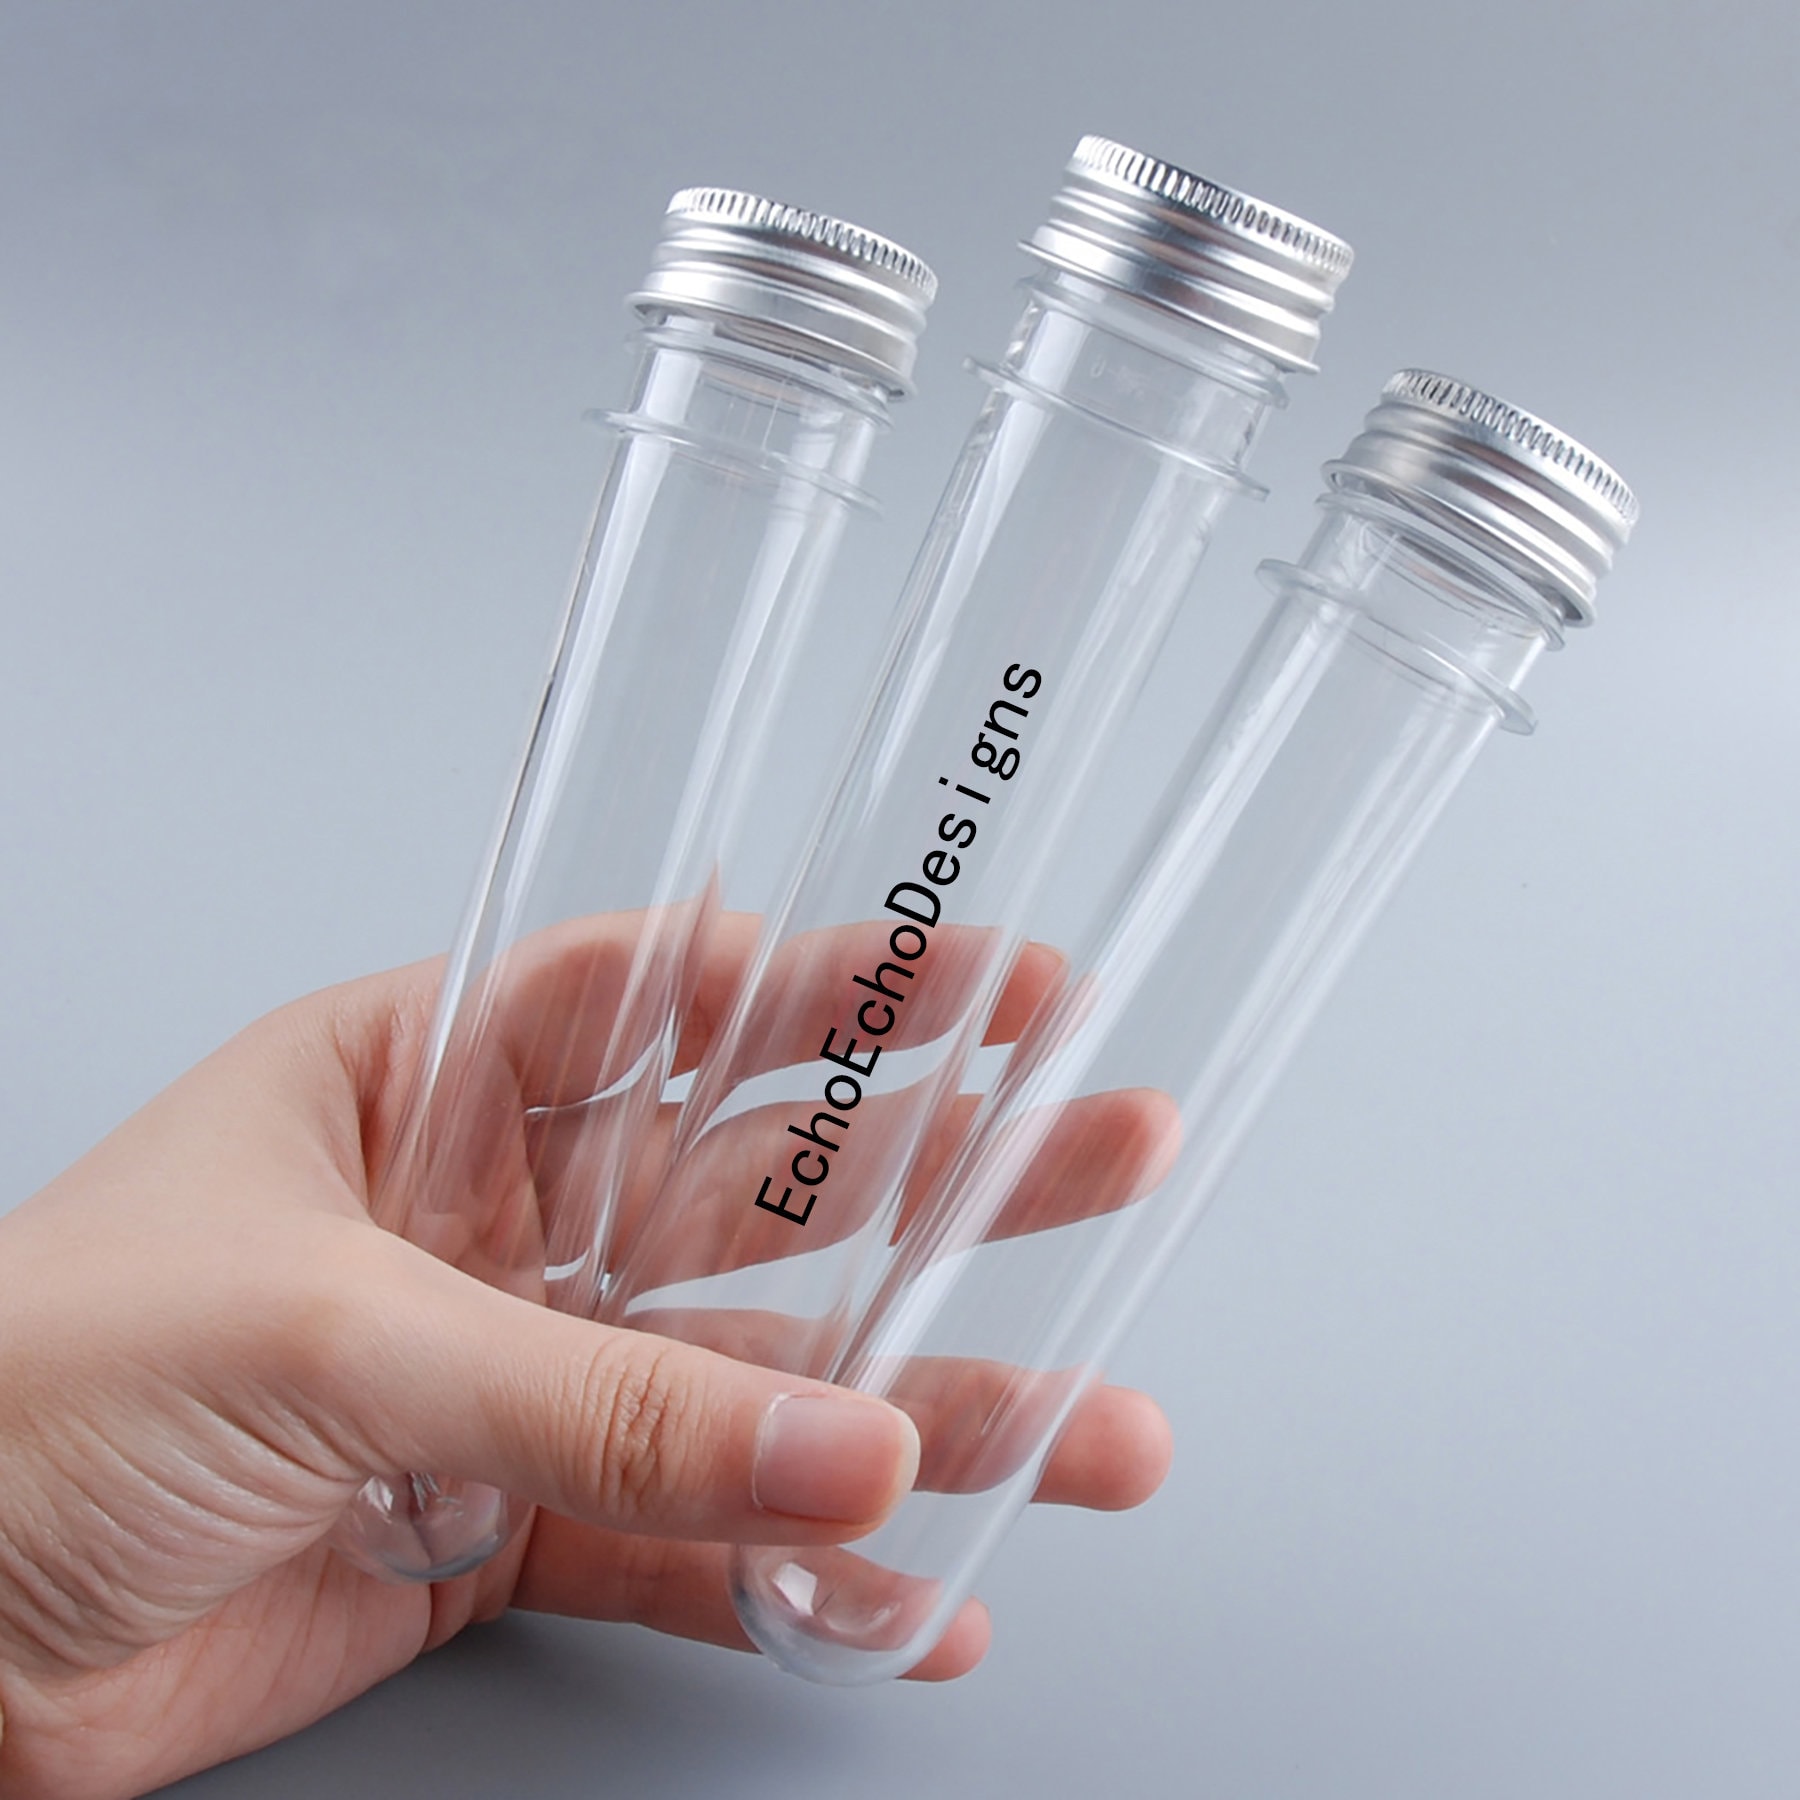 IPOTCH 10pcs Clear Plastic Test Tube with Caps Sample Containers Bottles Beads Storage 